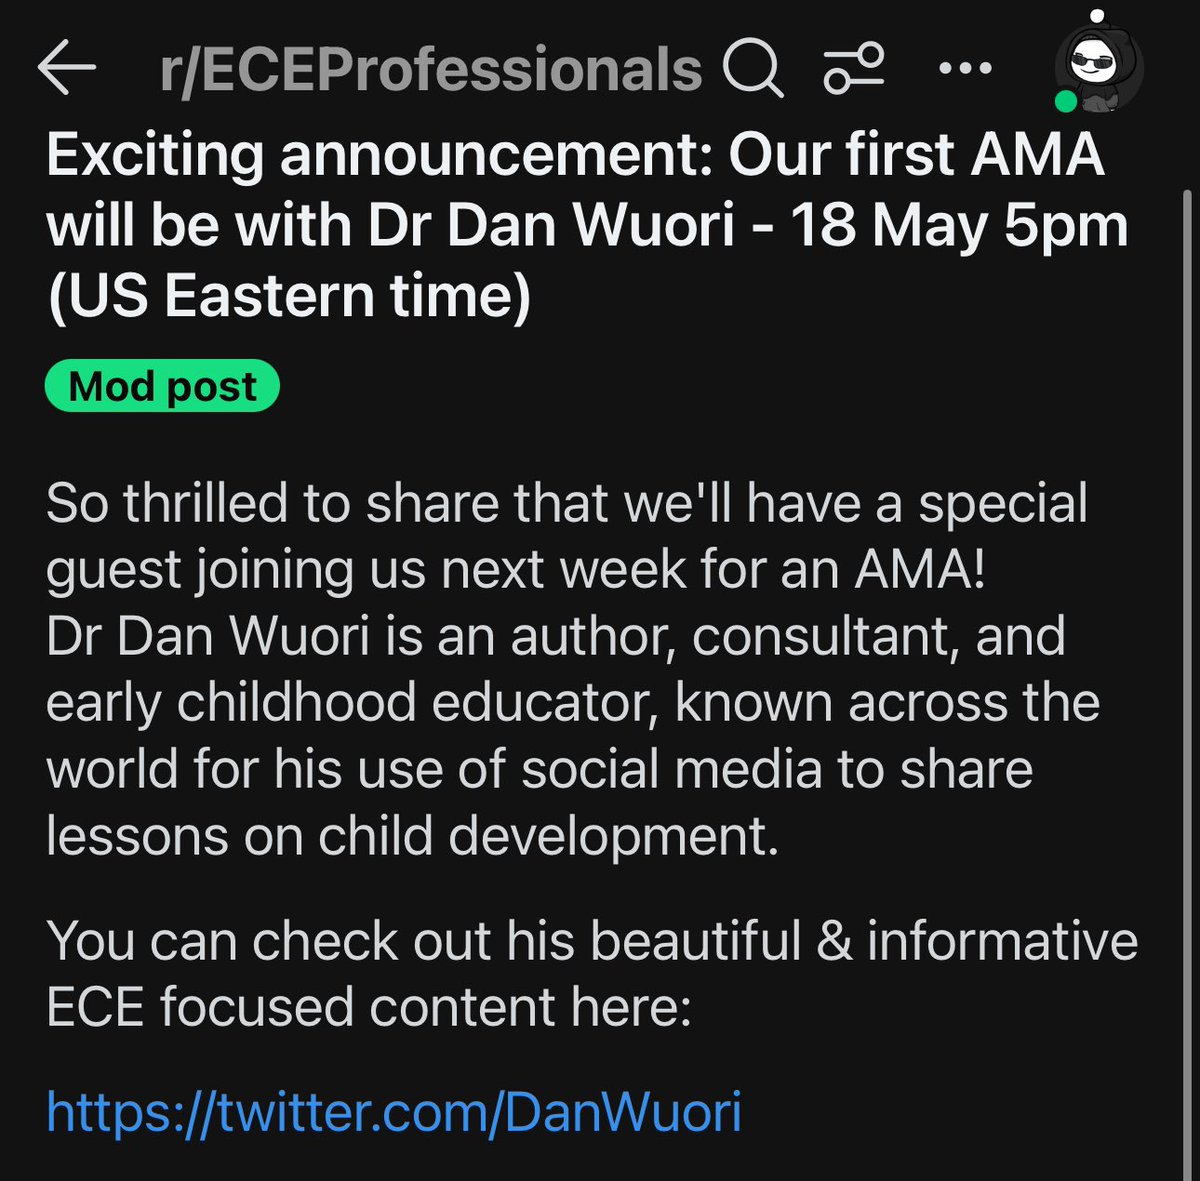 The X algorithm isn’t keen on the mention of other platforms, but I’m excited to share that I’ll be doing an AMA (Ask Me Anything) next Saturday with early childhood educators across the globe. Details in the screenshots below.